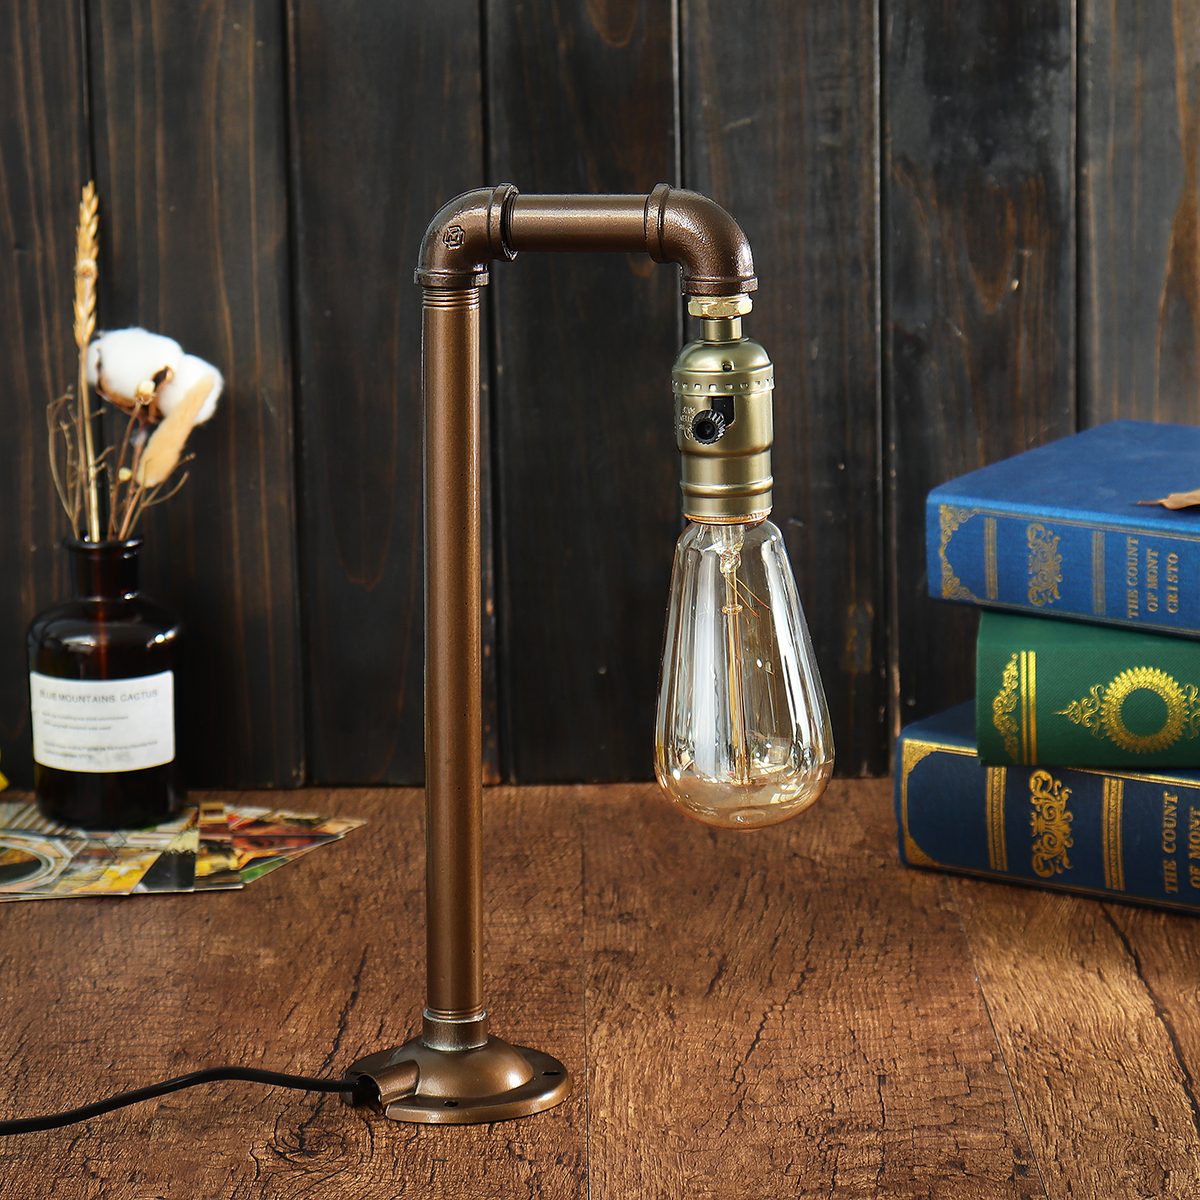 Industrial-Water-Pipe-E27-Bulb-Lamp-Light-Desk-Table-Lamp-Home-Bedroom-Fixture-Decor-1432211-3